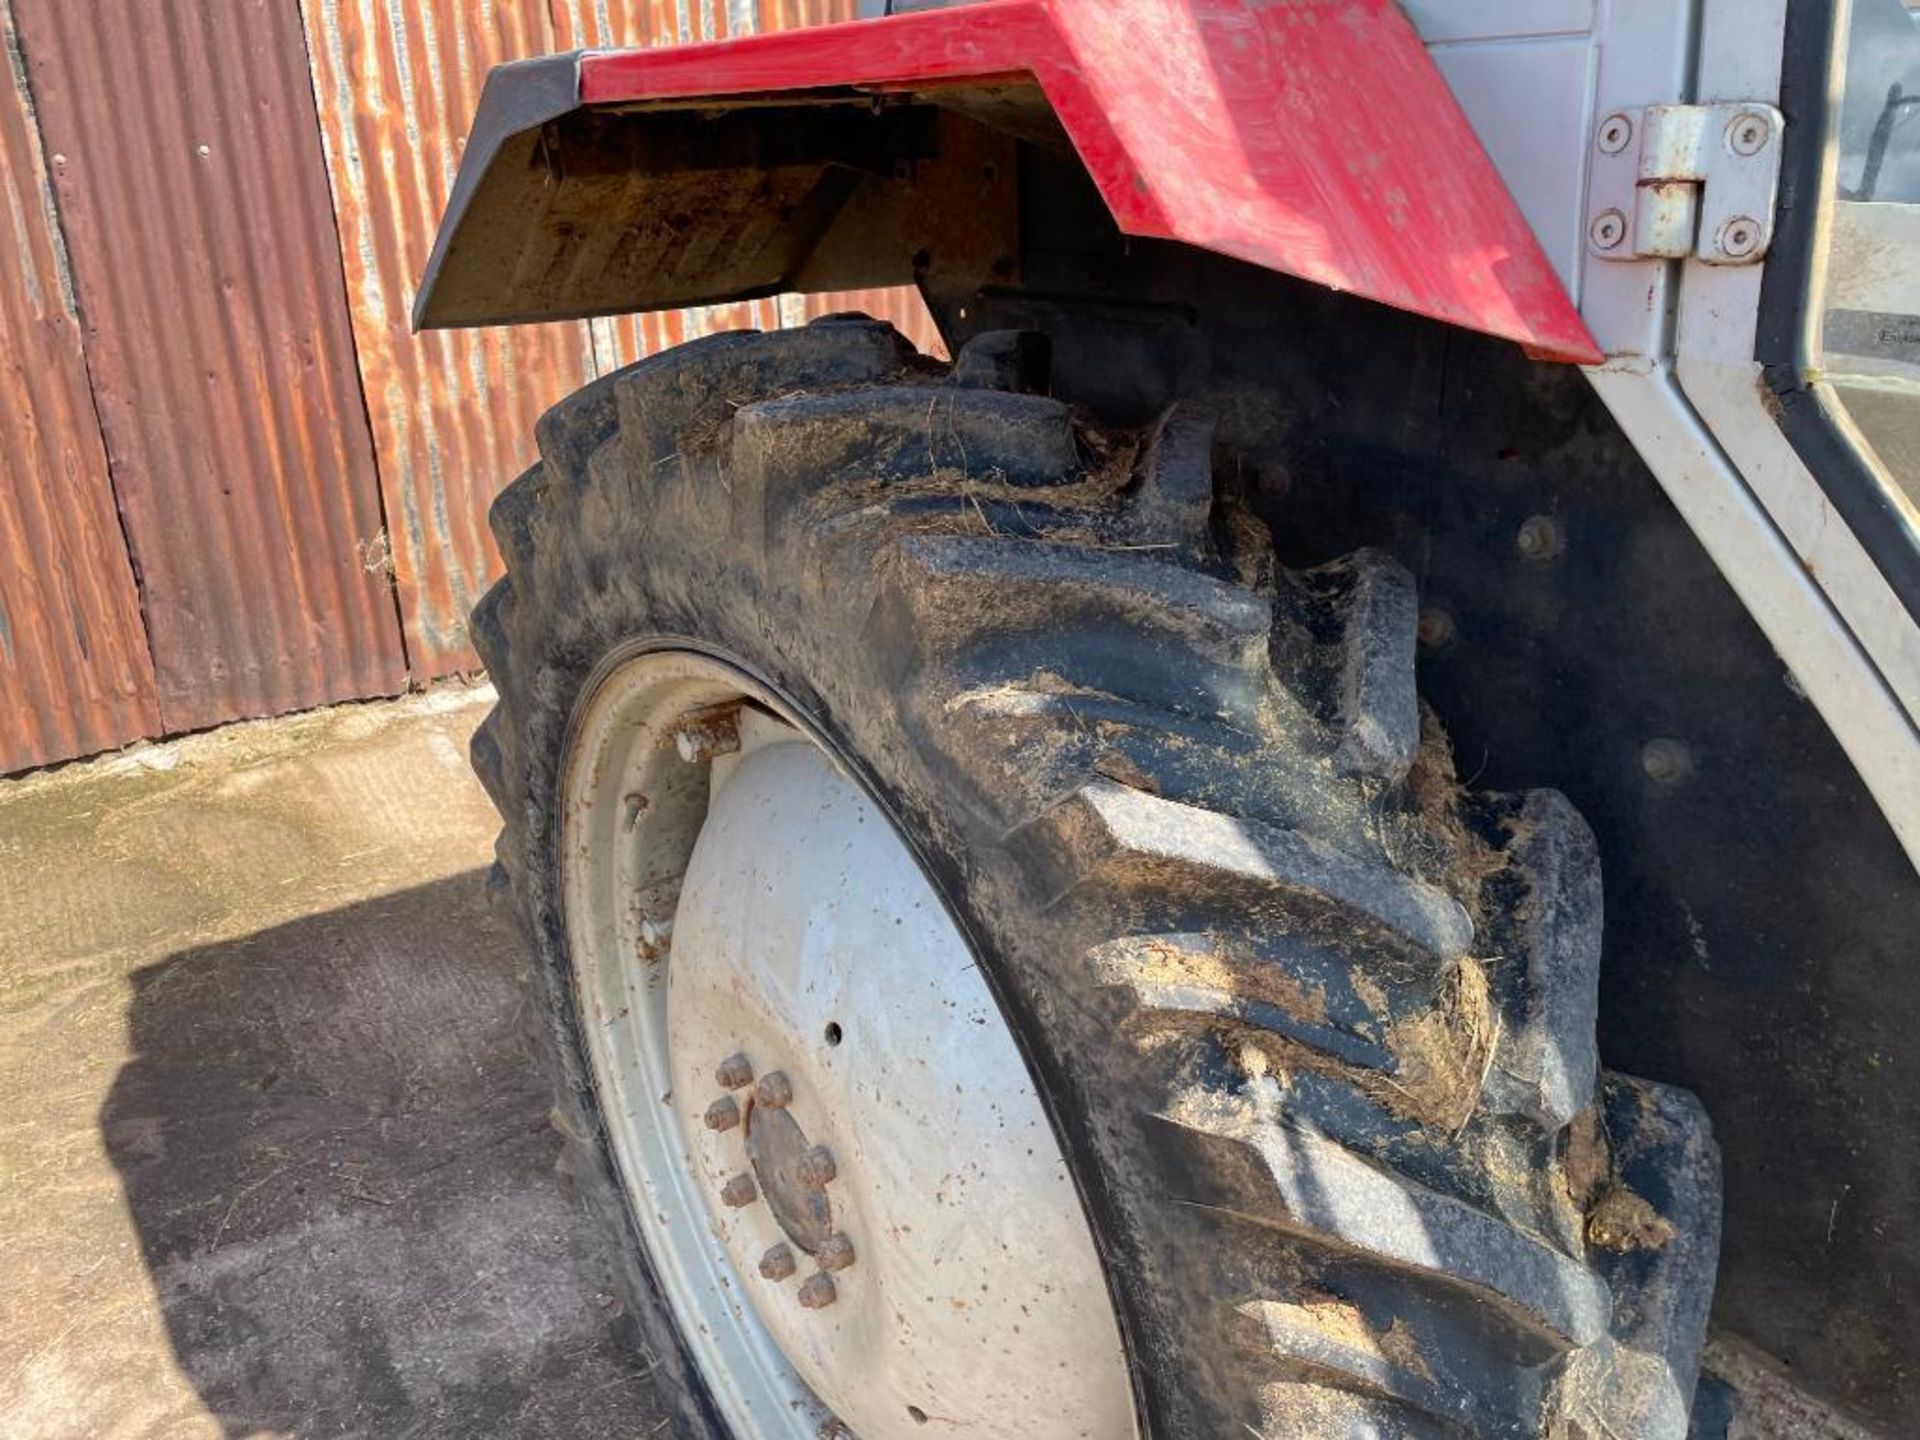 1990 Massey Ferguson 375 2wd tractor, 2 manual spools on Firestone 7.5-16 front and Firestone 13.6-3 - Image 6 of 24